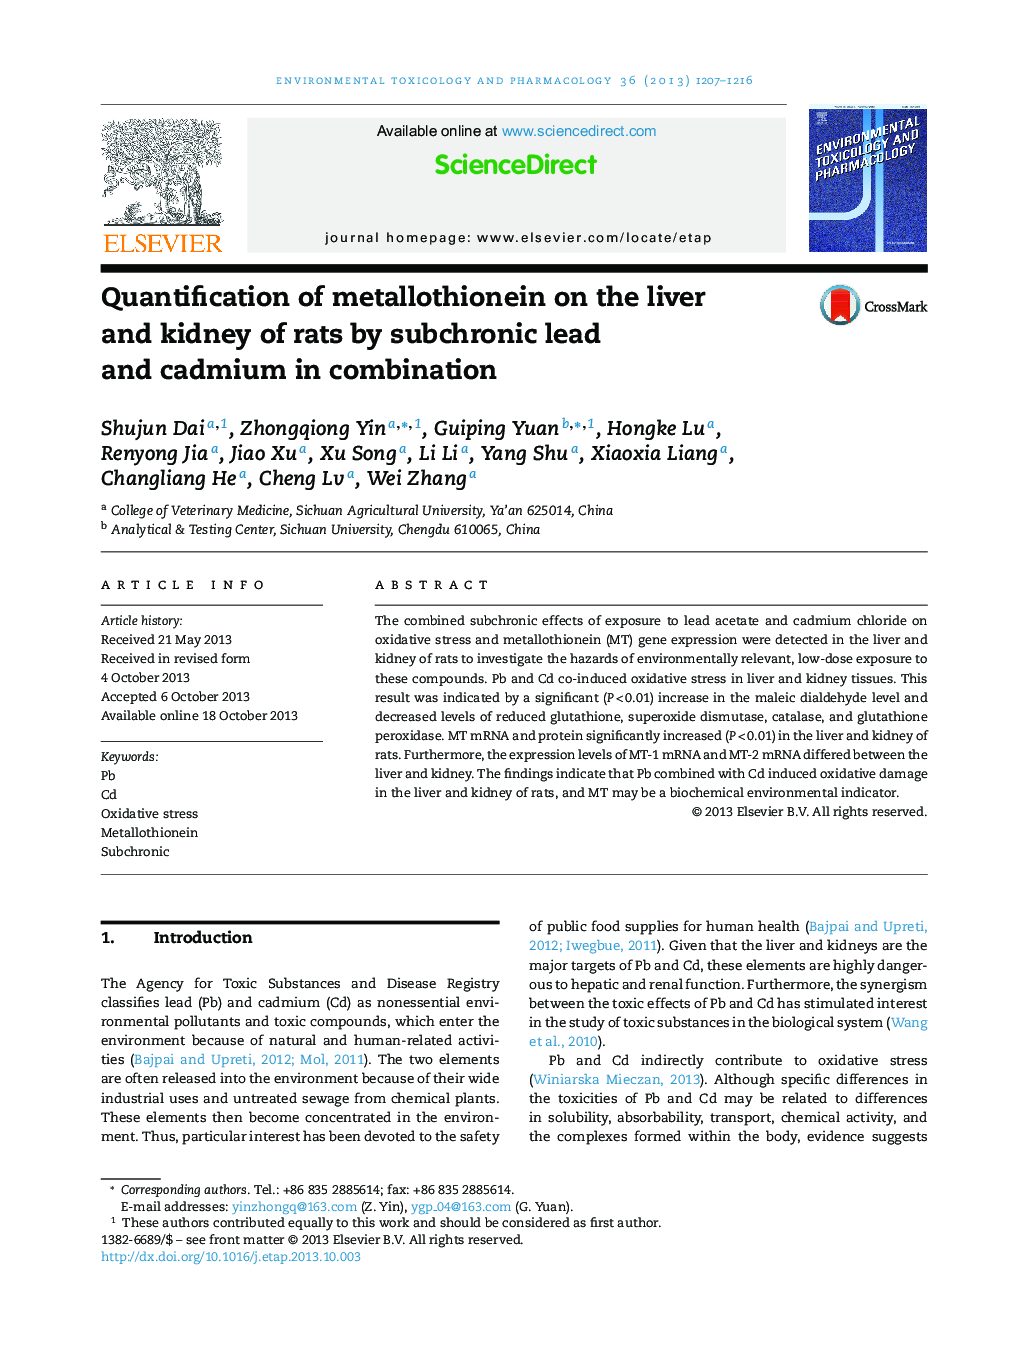 Quantification of metallothionein on the liver and kidney of rats by subchronic lead and cadmium in combination